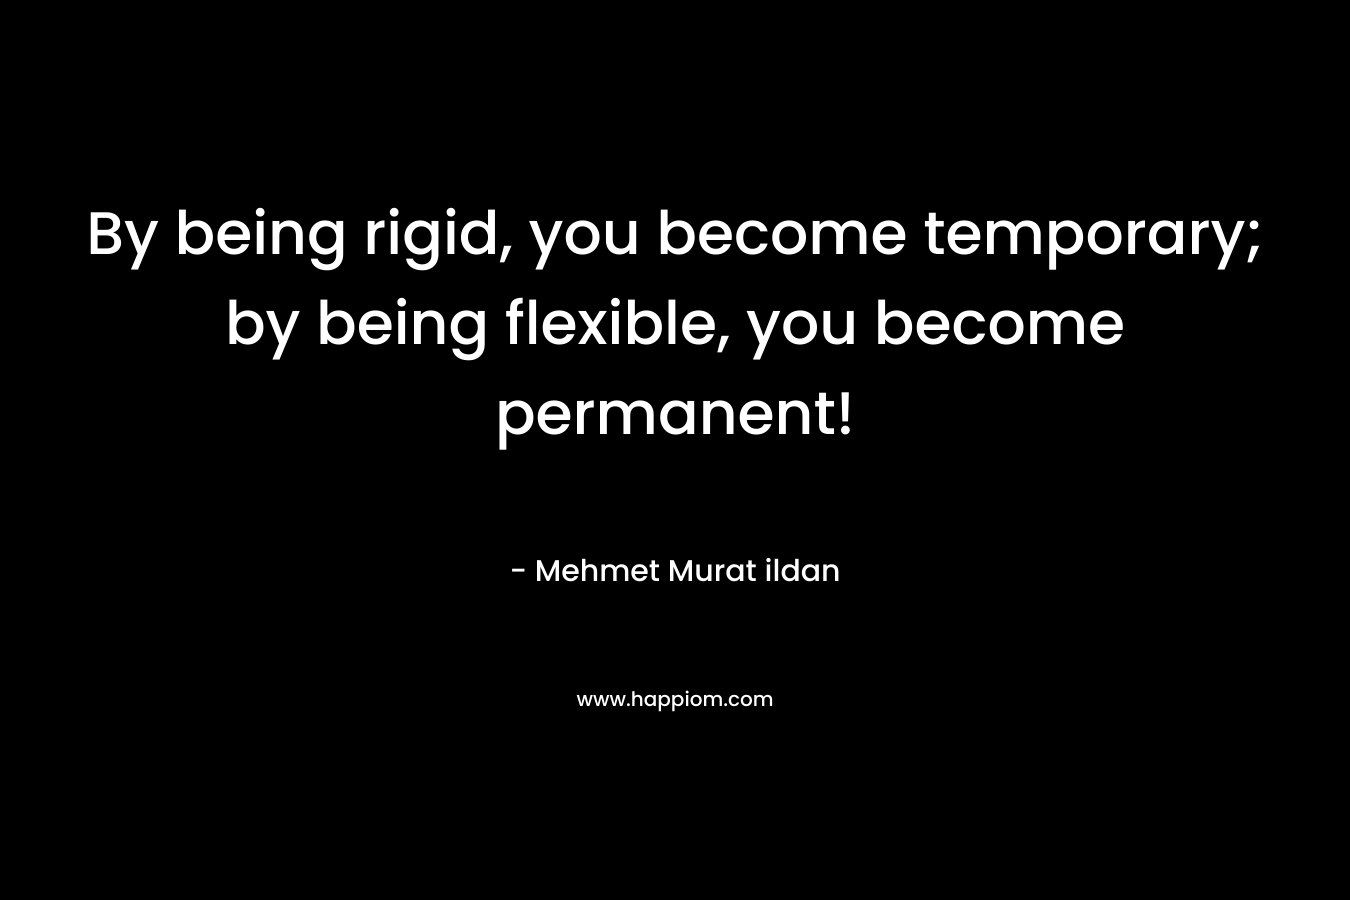 By being rigid, you become temporary; by being flexible, you become permanent! – Mehmet Murat ildan